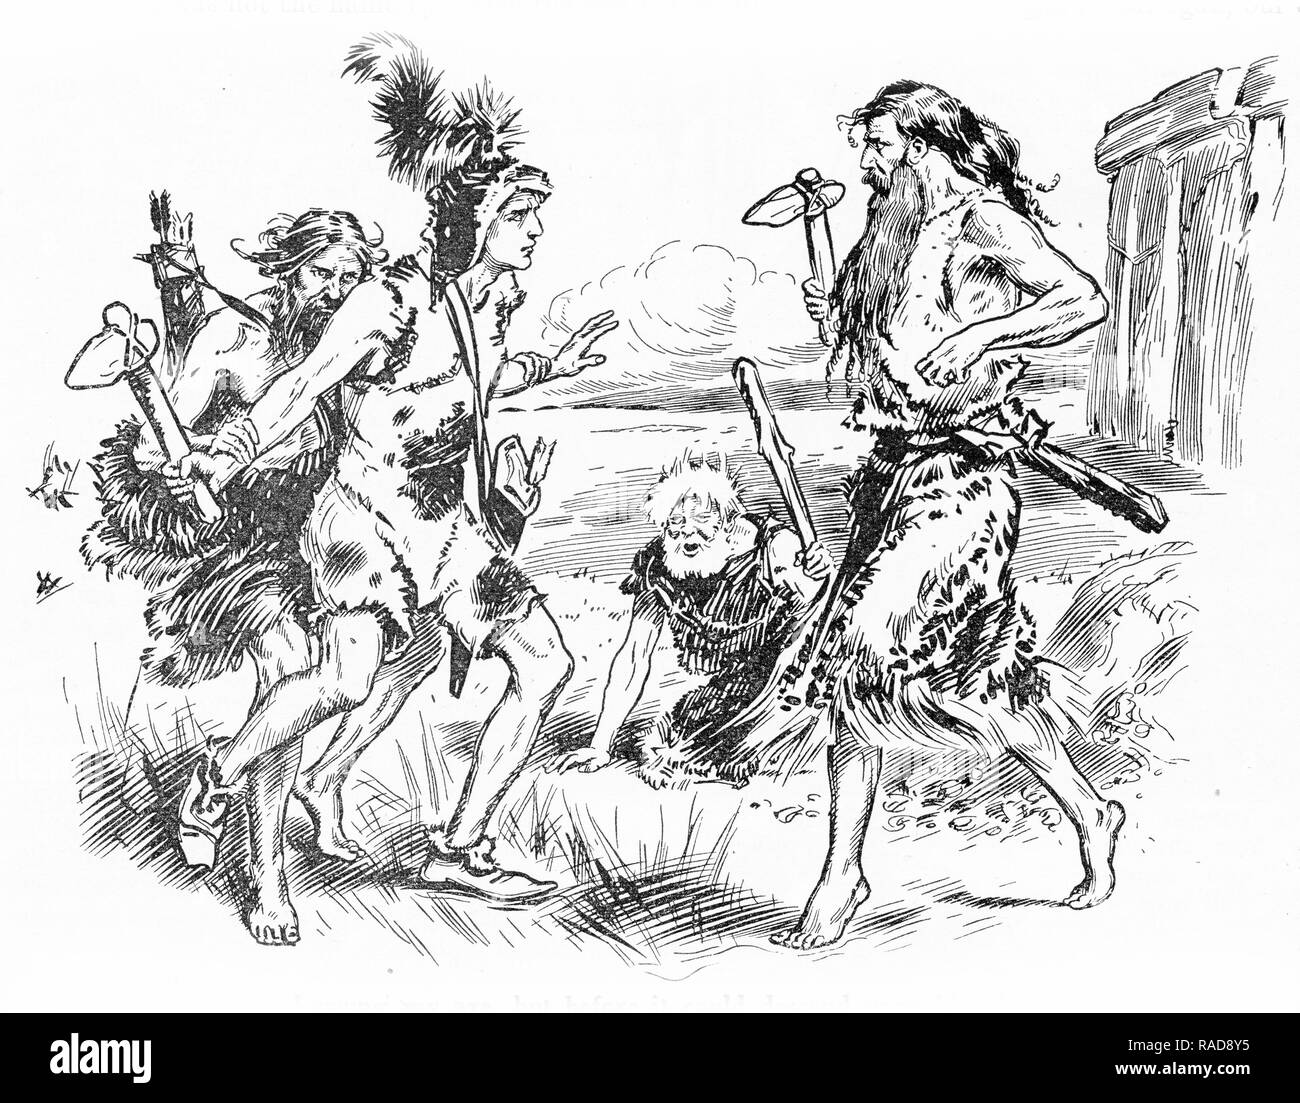 Engraving of a confrontation between stone-age men. From an original engraving in the Boys Own Annual 1925. Stock Photo